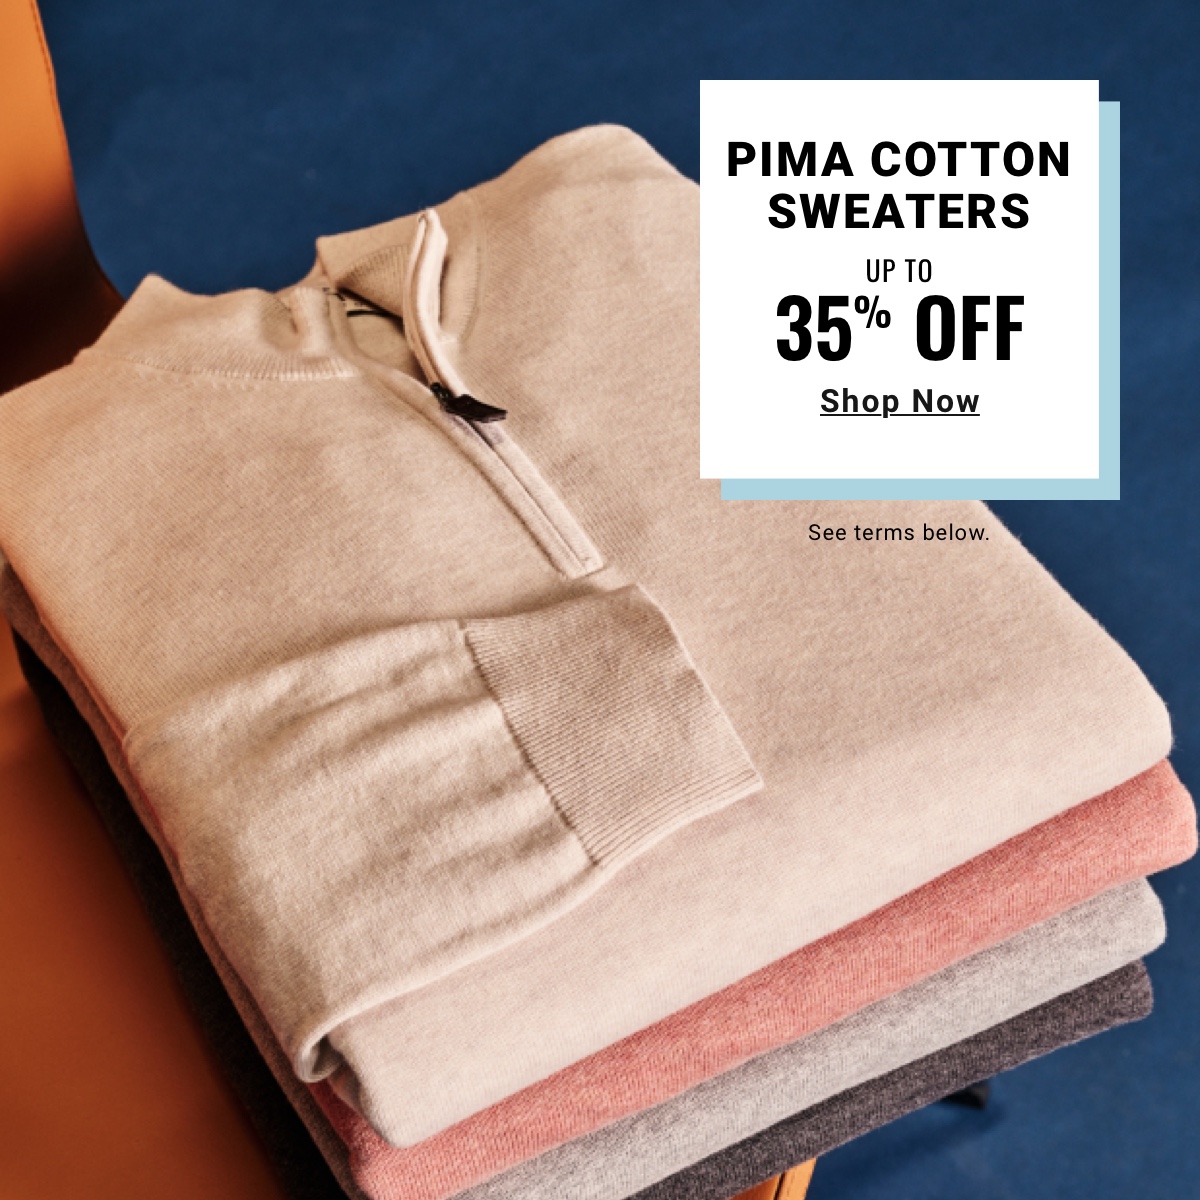 Pima Cotton Sweaters|Up to 35% Off